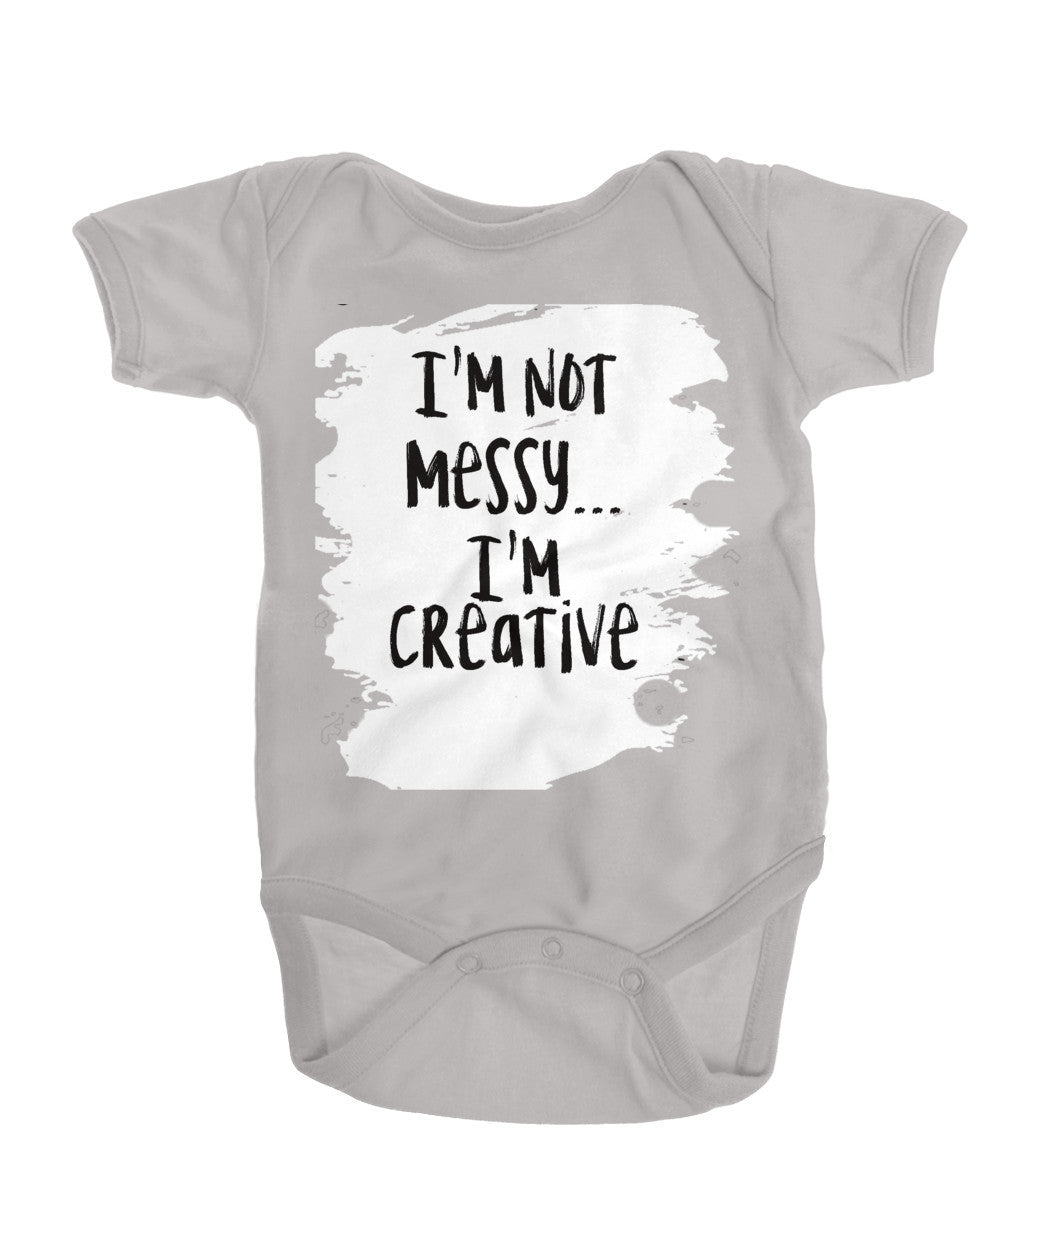 I'm Not MESSY, I'm CREATIVE - Artified Apparel